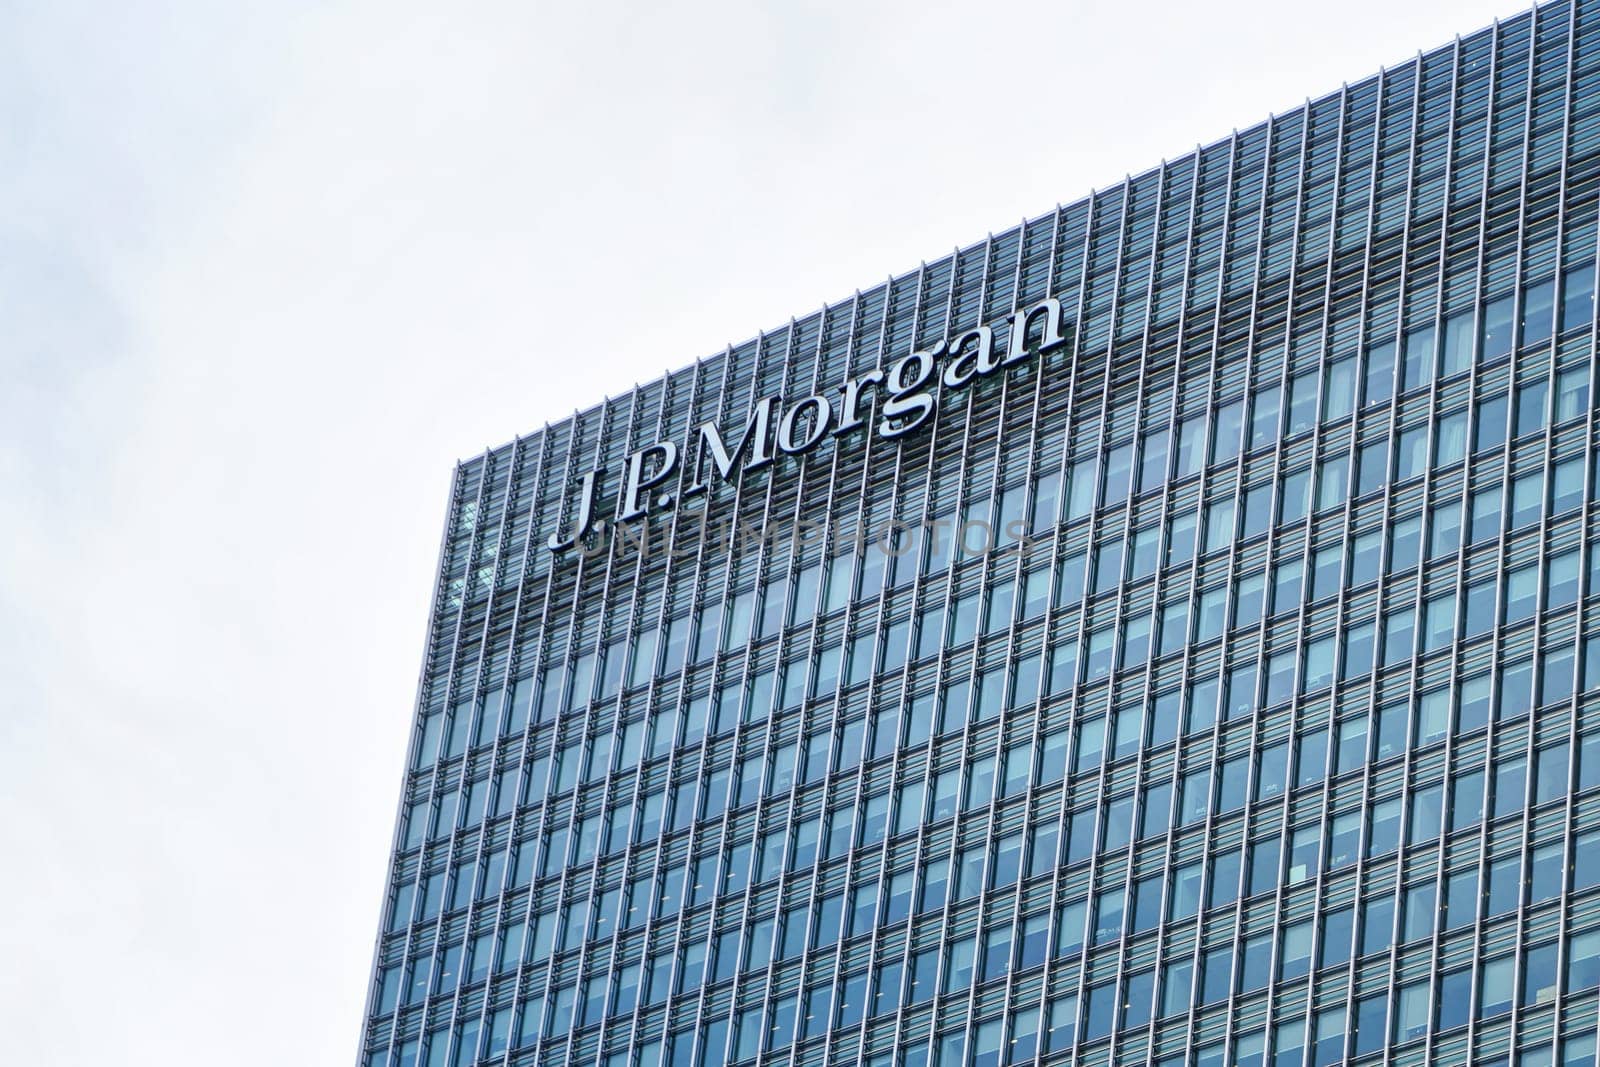 London, United Kingdom - February 03, 2019: Sun shines on J P Morgan signage at top of their UK branch at Canary Wharf. JPMorgan Chase is US multinational investment bank founded (originally) 1799 by Ivanko